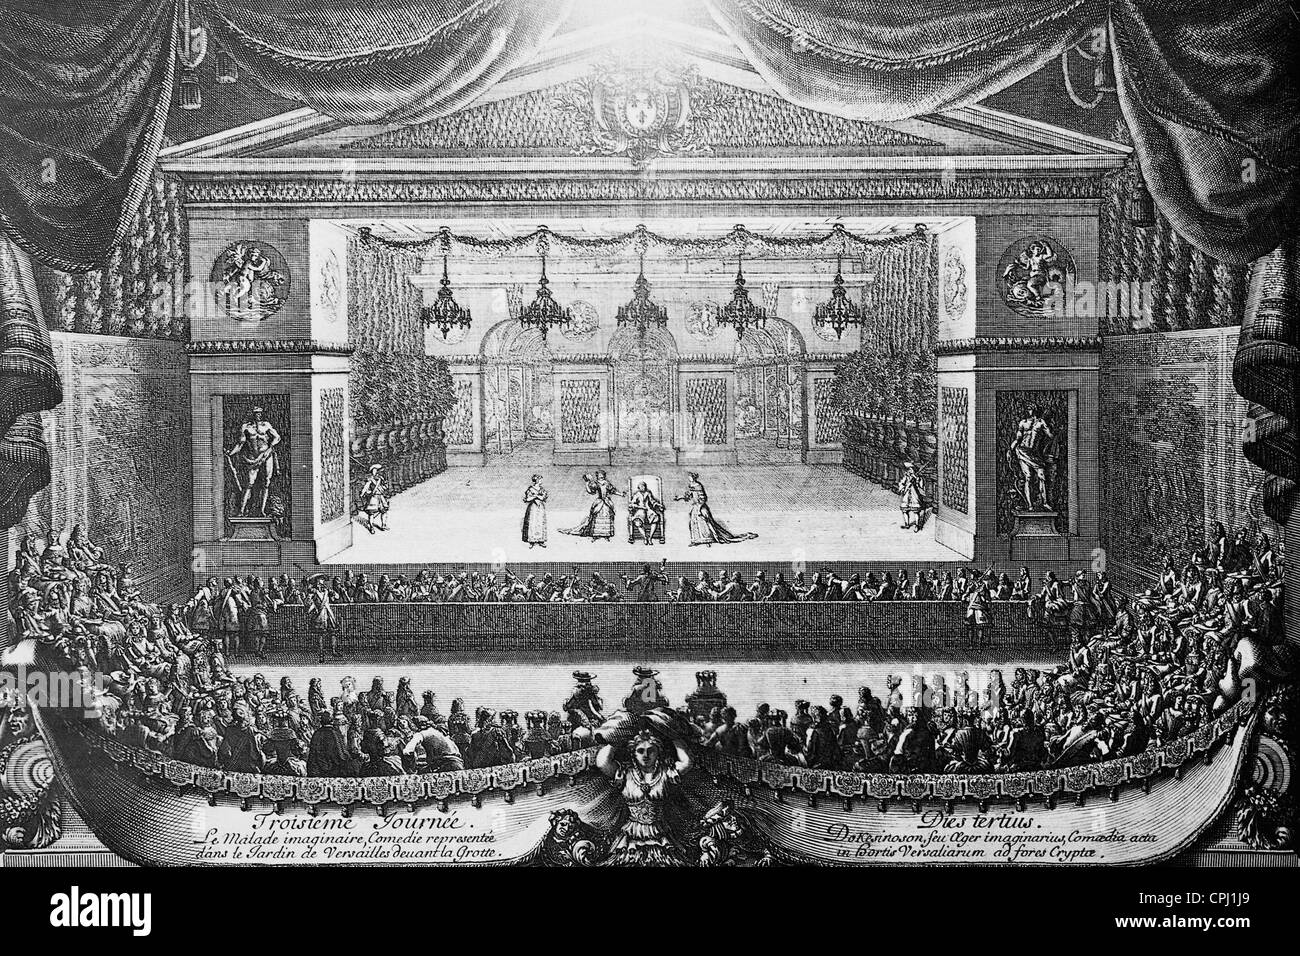 Performance of 'The Hypochondriac' at the court of Versailles, 1676 Stock Photo